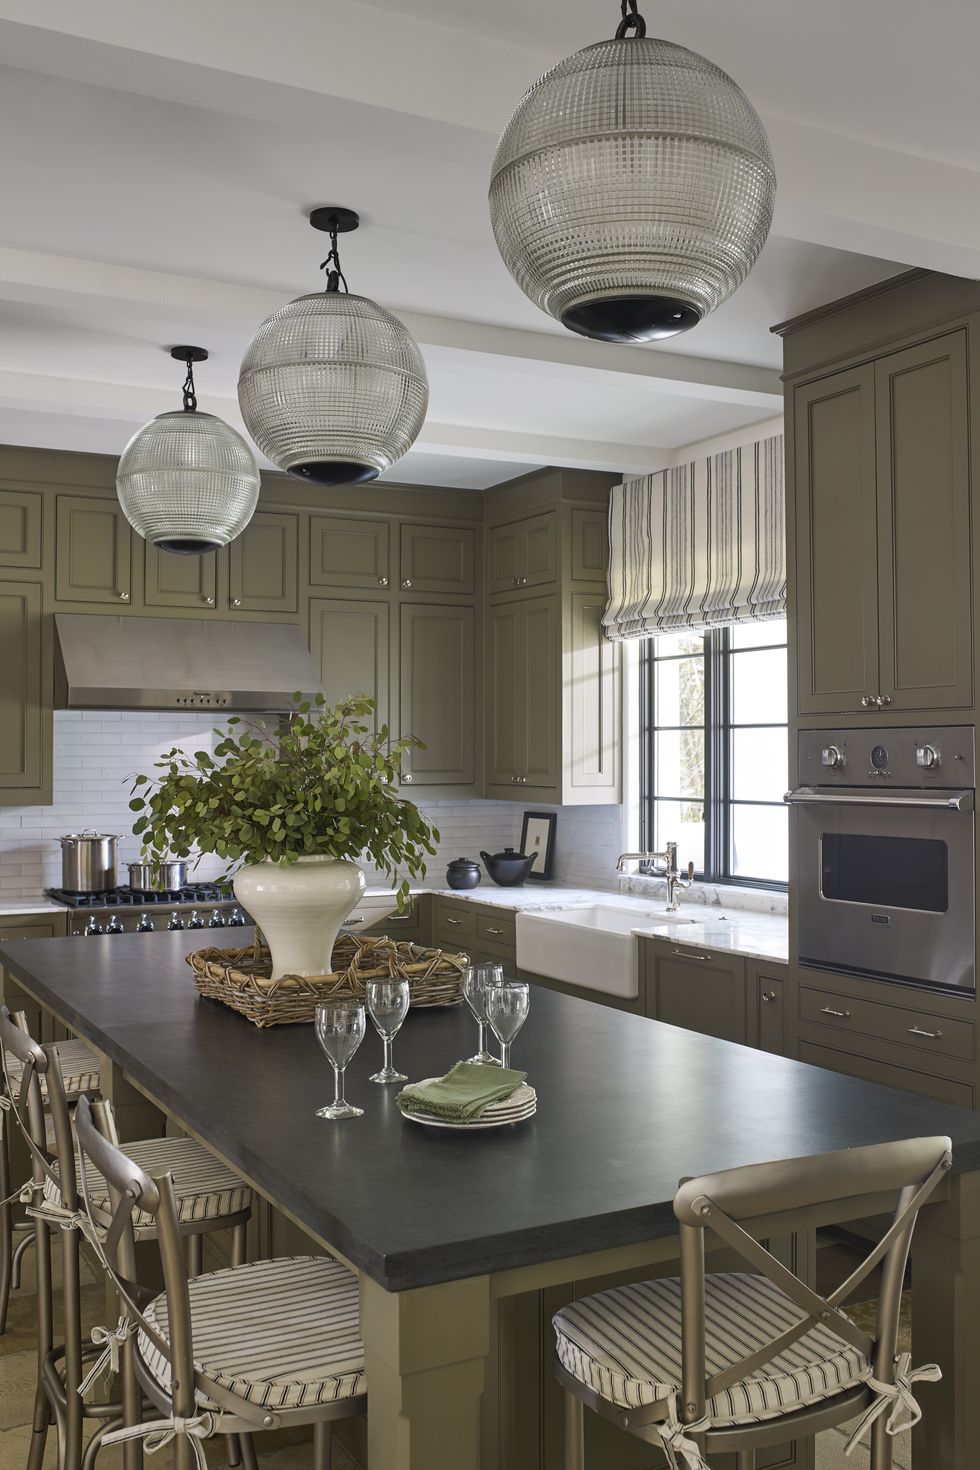 14 of the Best Kitchen Paint Colors to Rev Up Your Walls